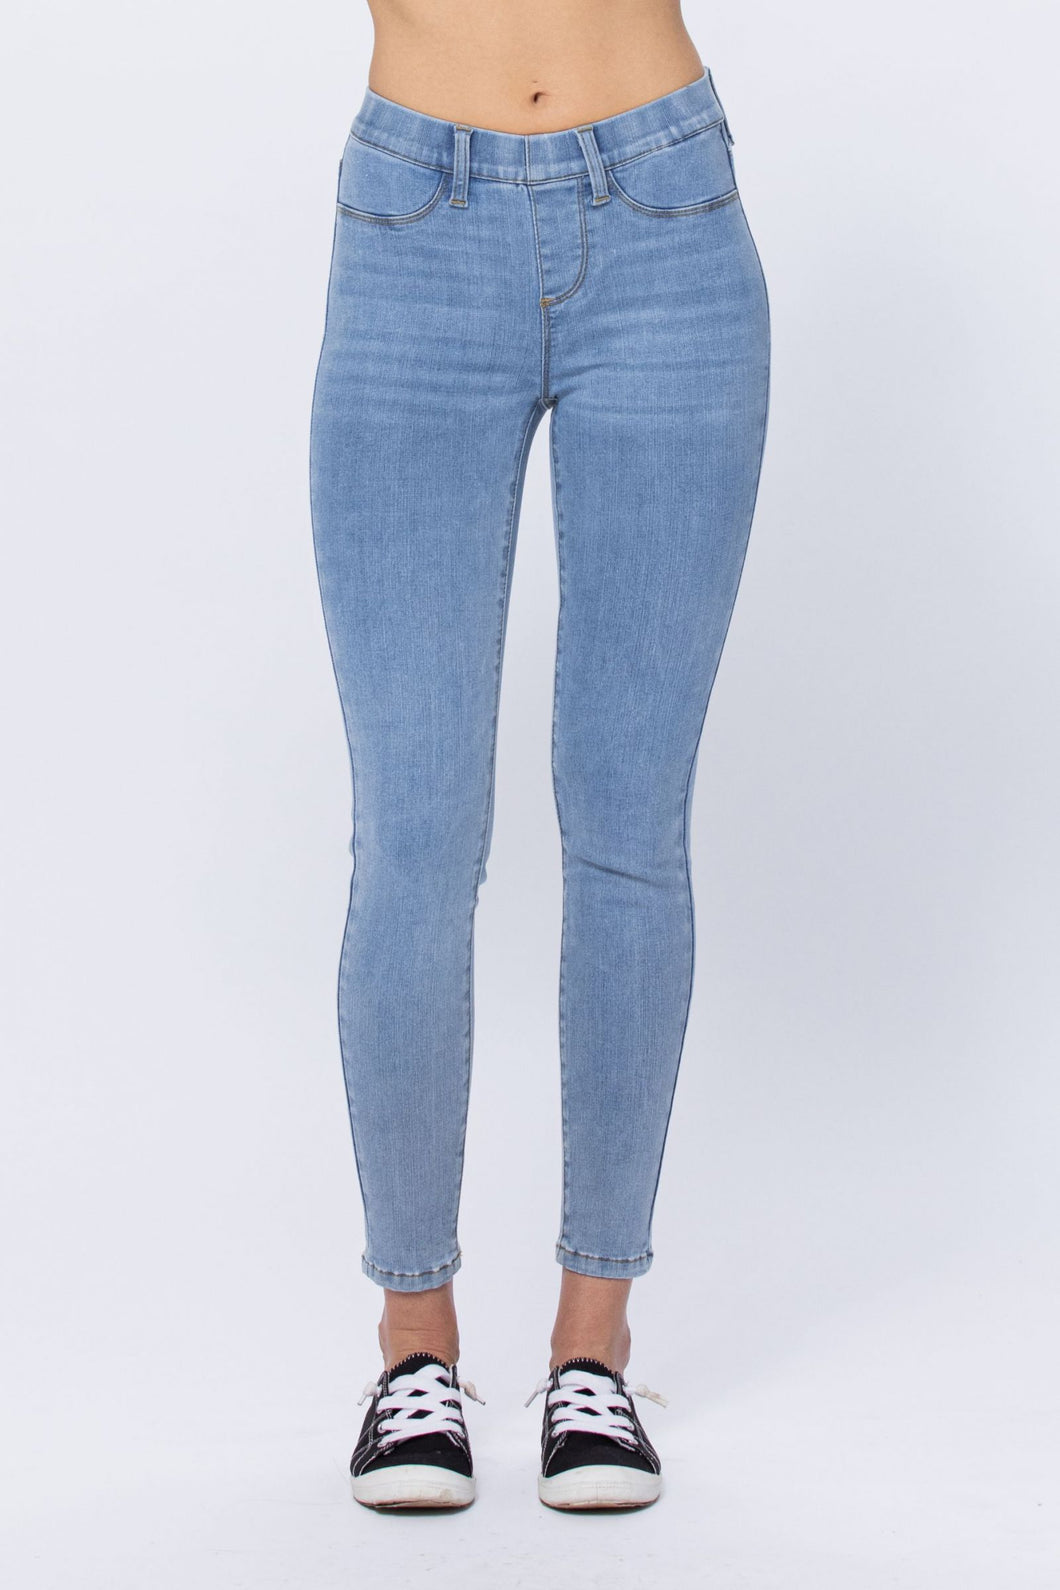 Judy blue pull on jegging jeans